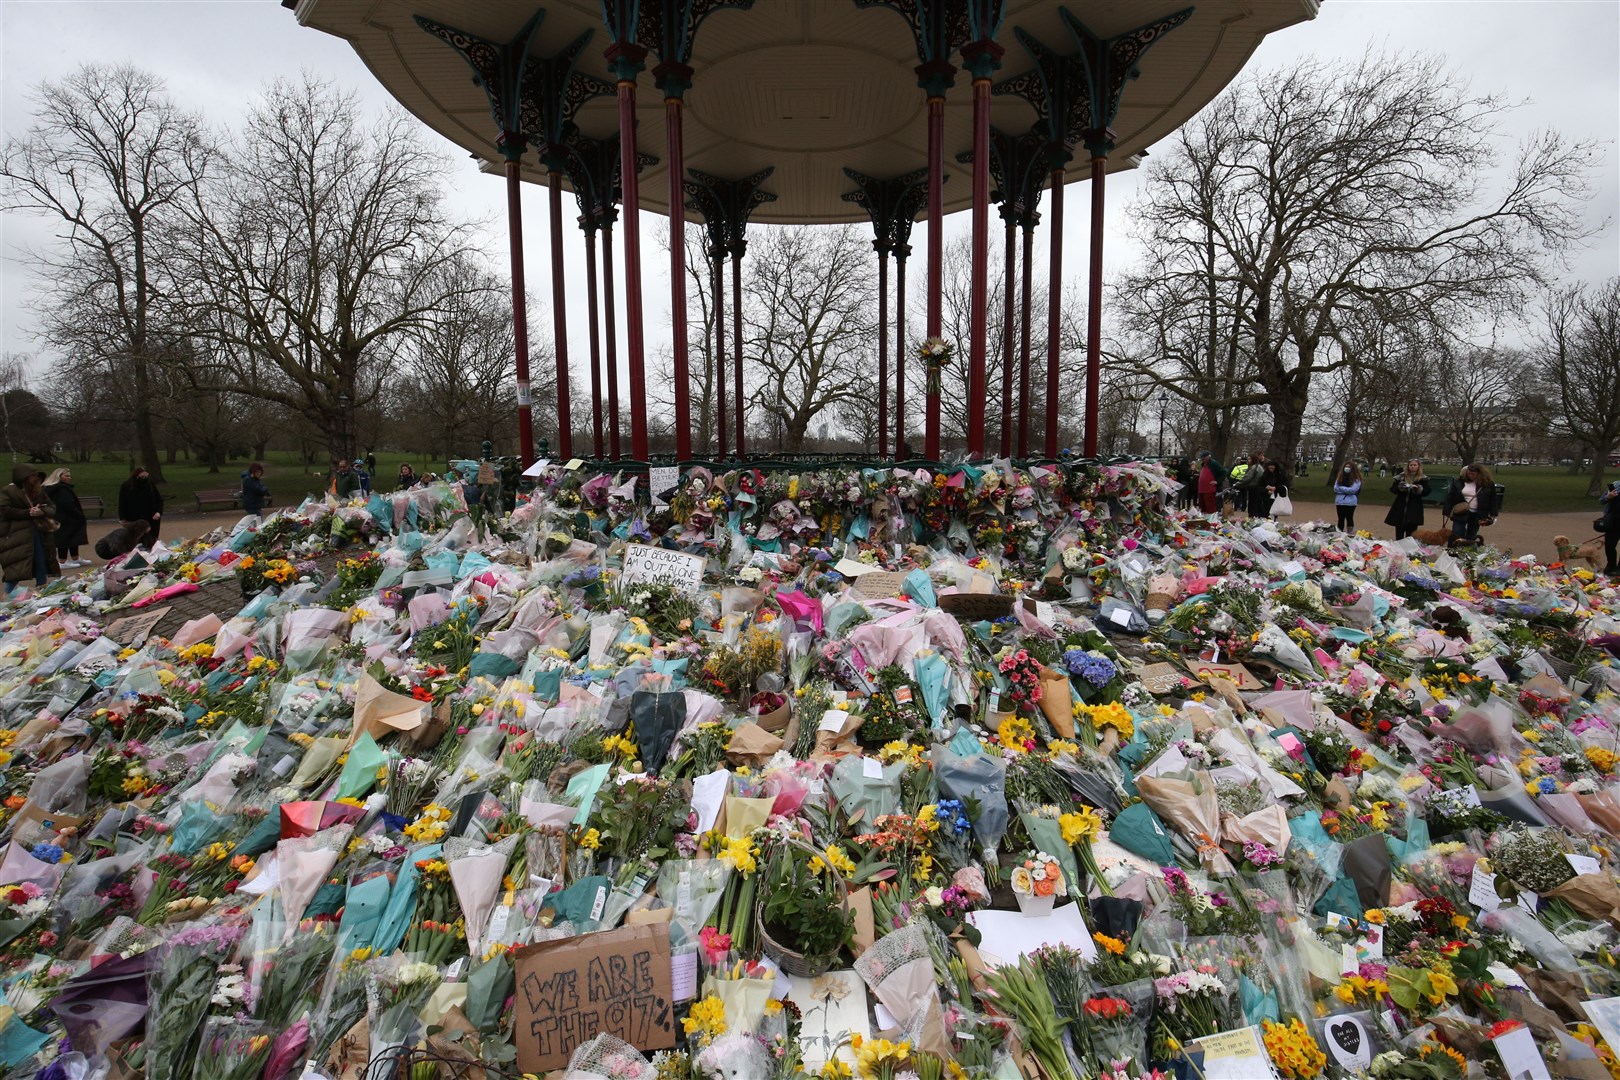 Floral tributes left at the bandstand in Clapham Common, London, for murdered Sarah Everard (Jonathan Brady/PA)